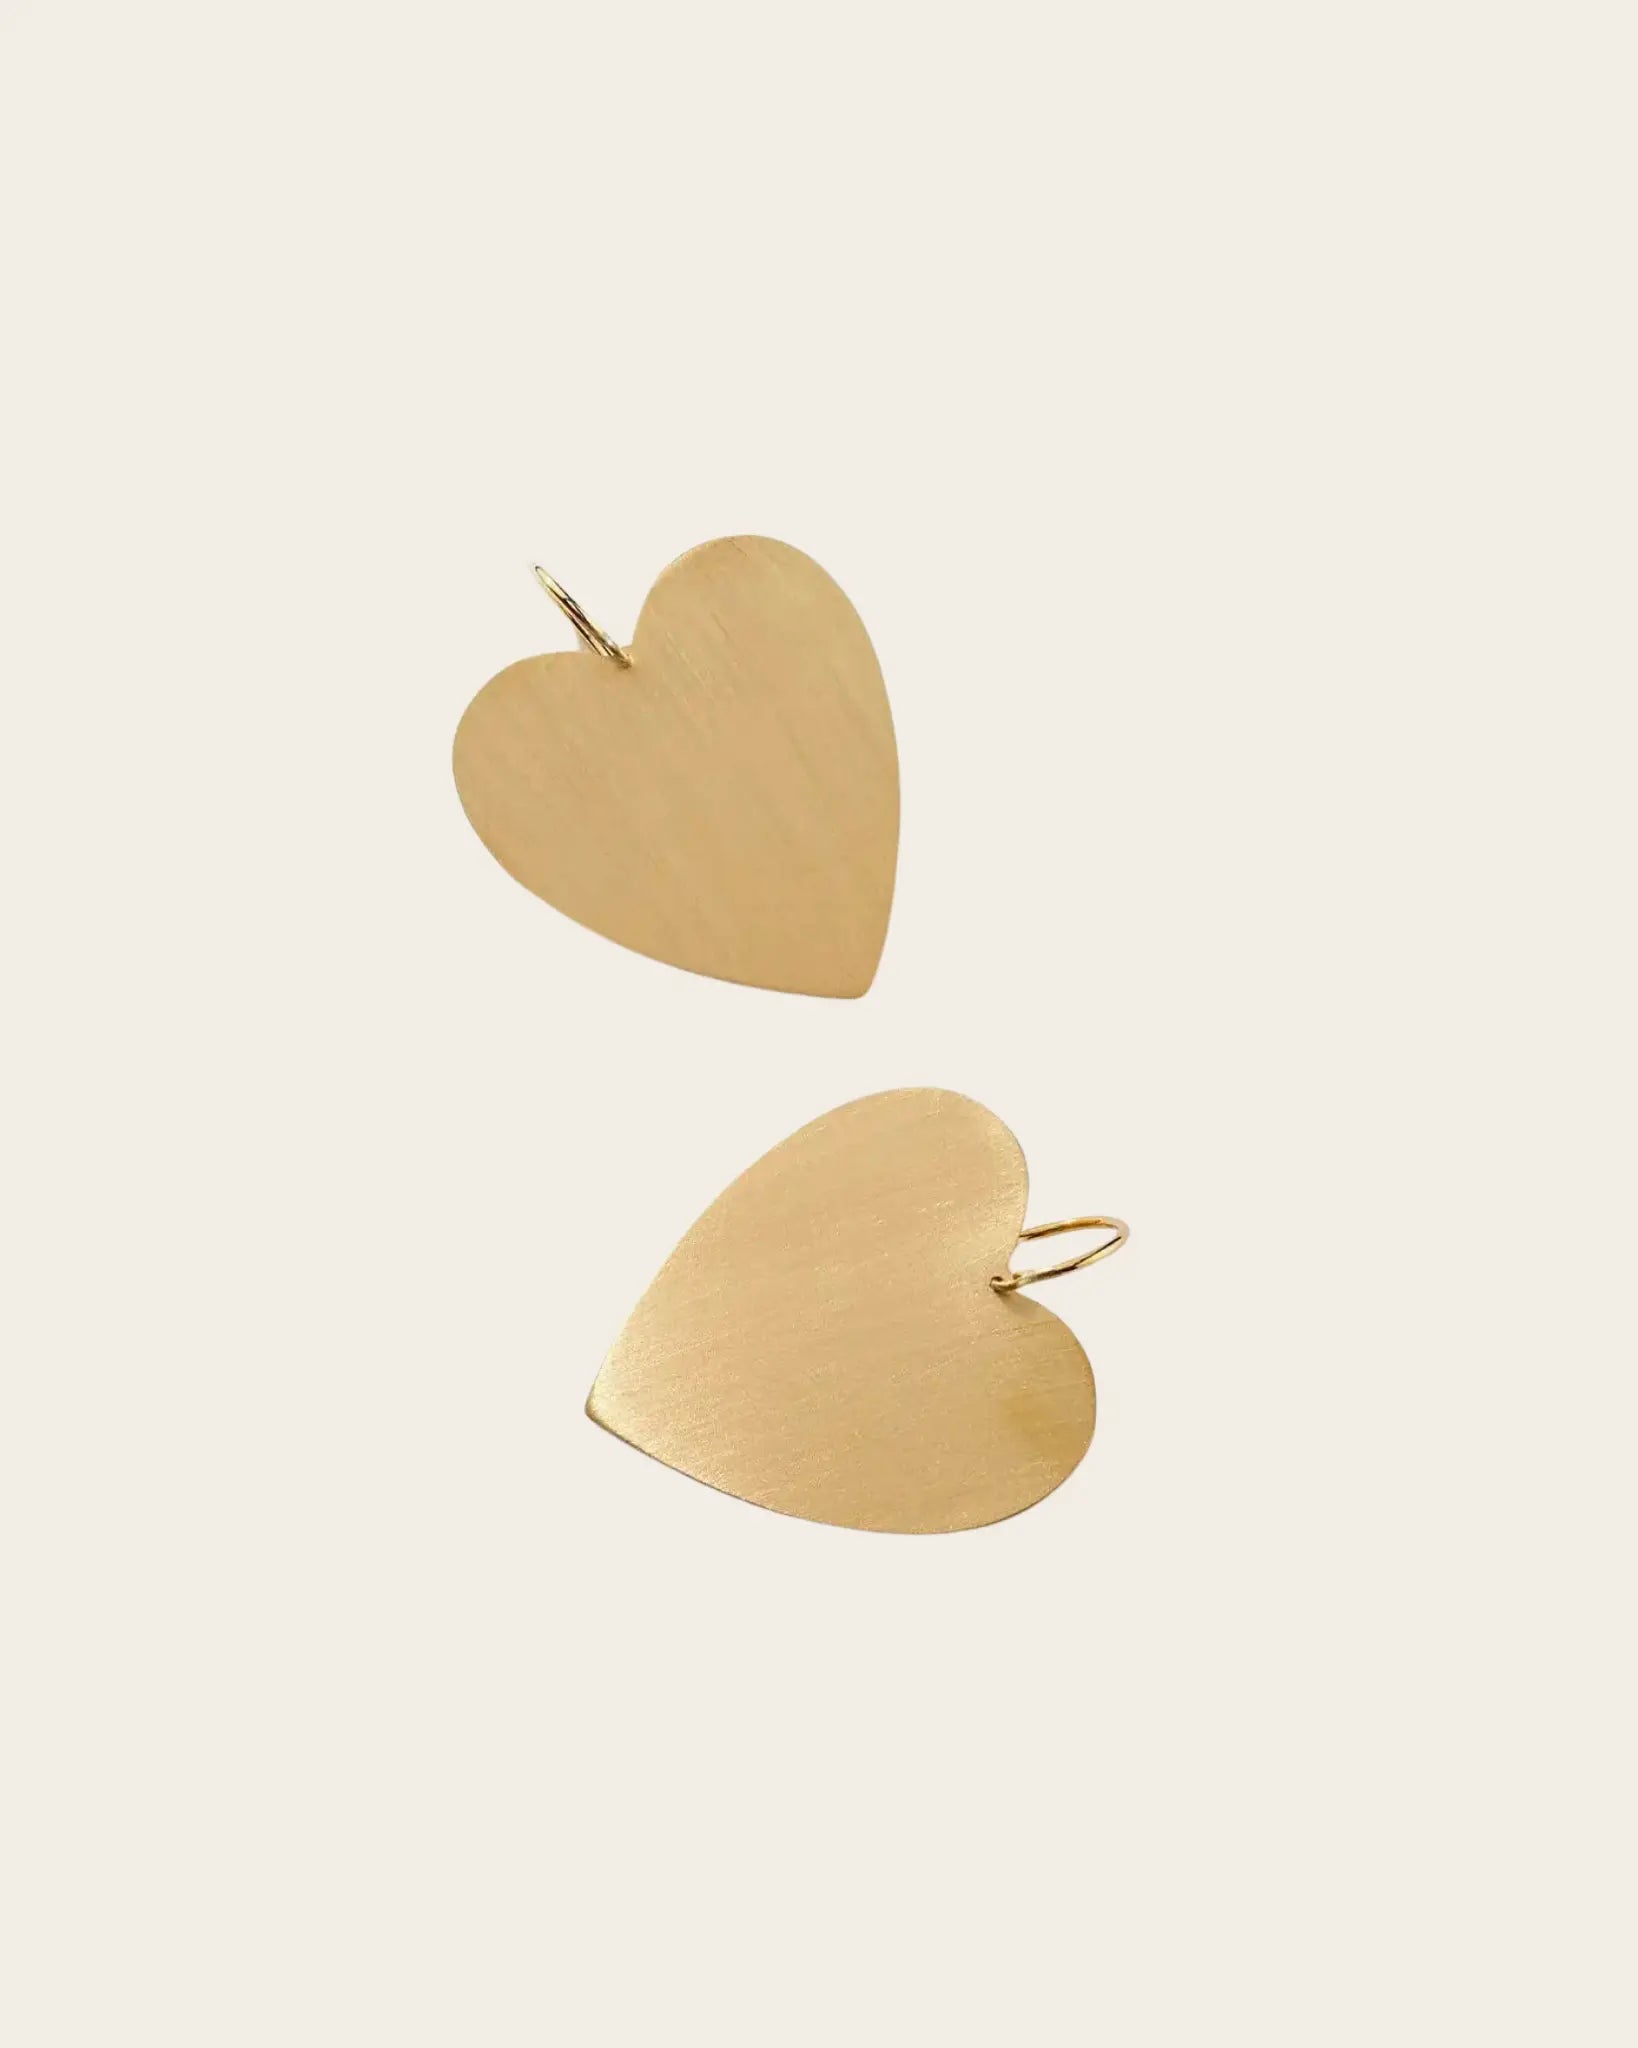 Large Gold Classic Love Earrings Large Gold Classic Love Earrings Irene Neuwirth Irene Neuwirth  Squash Blossom Vail